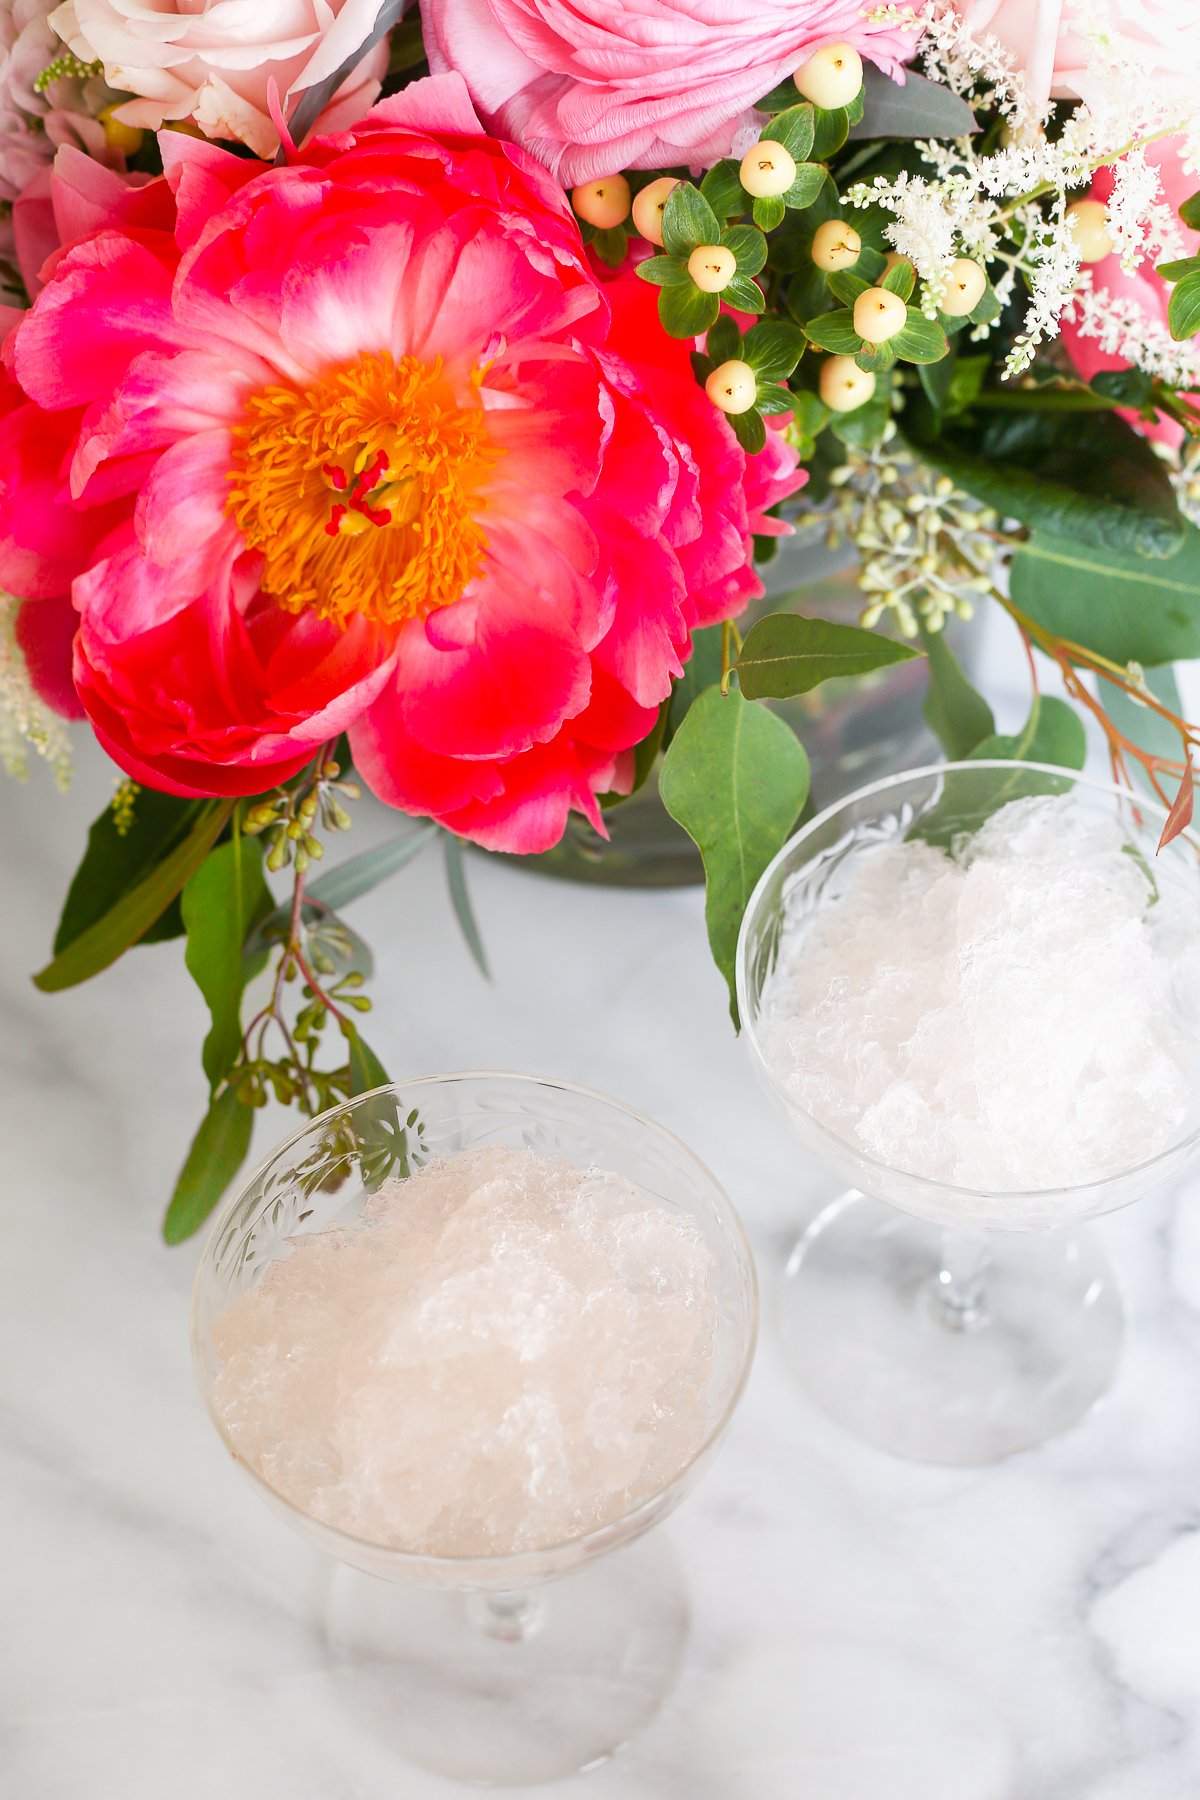 Two glasses with ice in them next to a bouquet of flowers, perfect for enjoying a refreshing frosé.